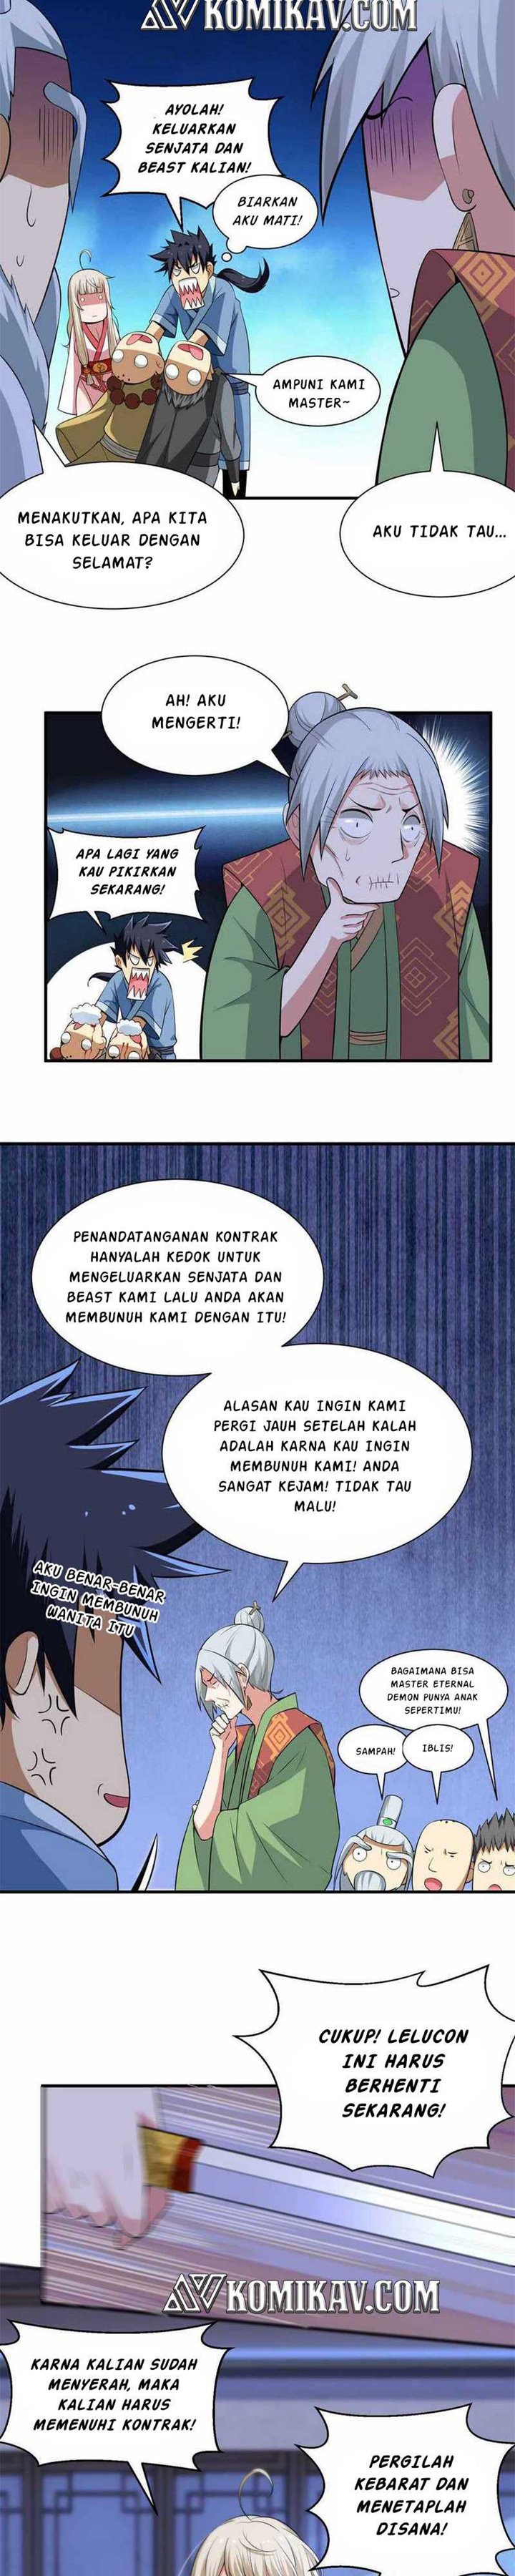 Dilarang COPAS - situs resmi www.mangacanblog.com - Komik i just want to be beaten to death by everyone 015 - chapter 15 16 Indonesia i just want to be beaten to death by everyone 015 - chapter 15 Terbaru 2|Baca Manga Komik Indonesia|Mangacan